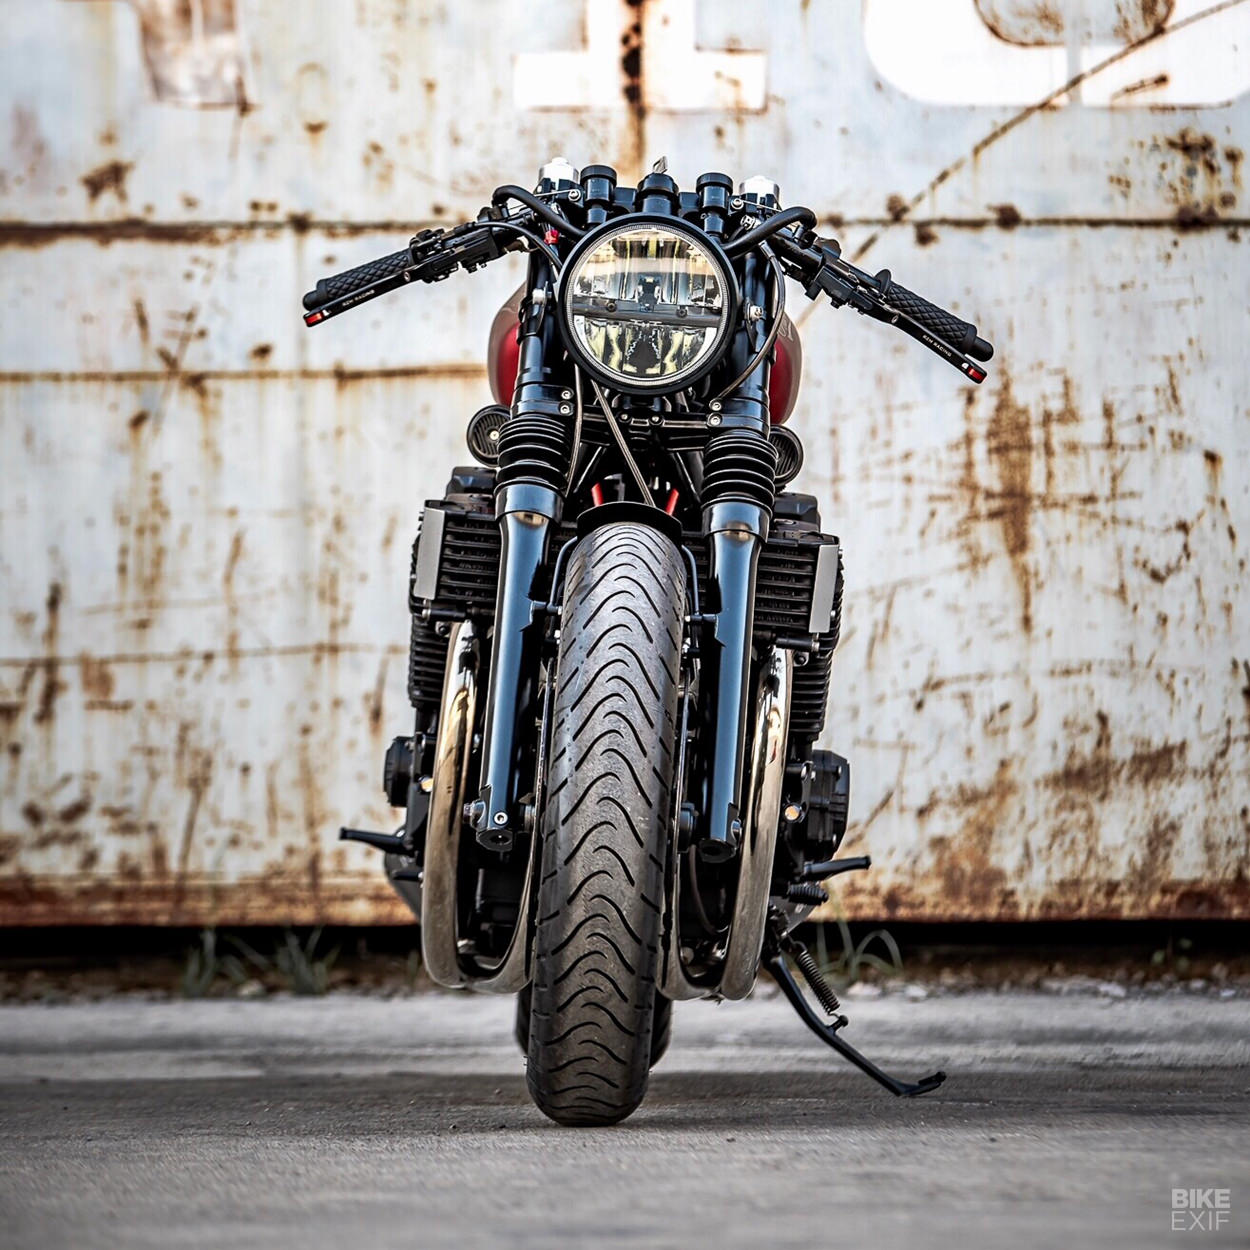 Yamaha XJR 1300 cafe racer by K-Speed